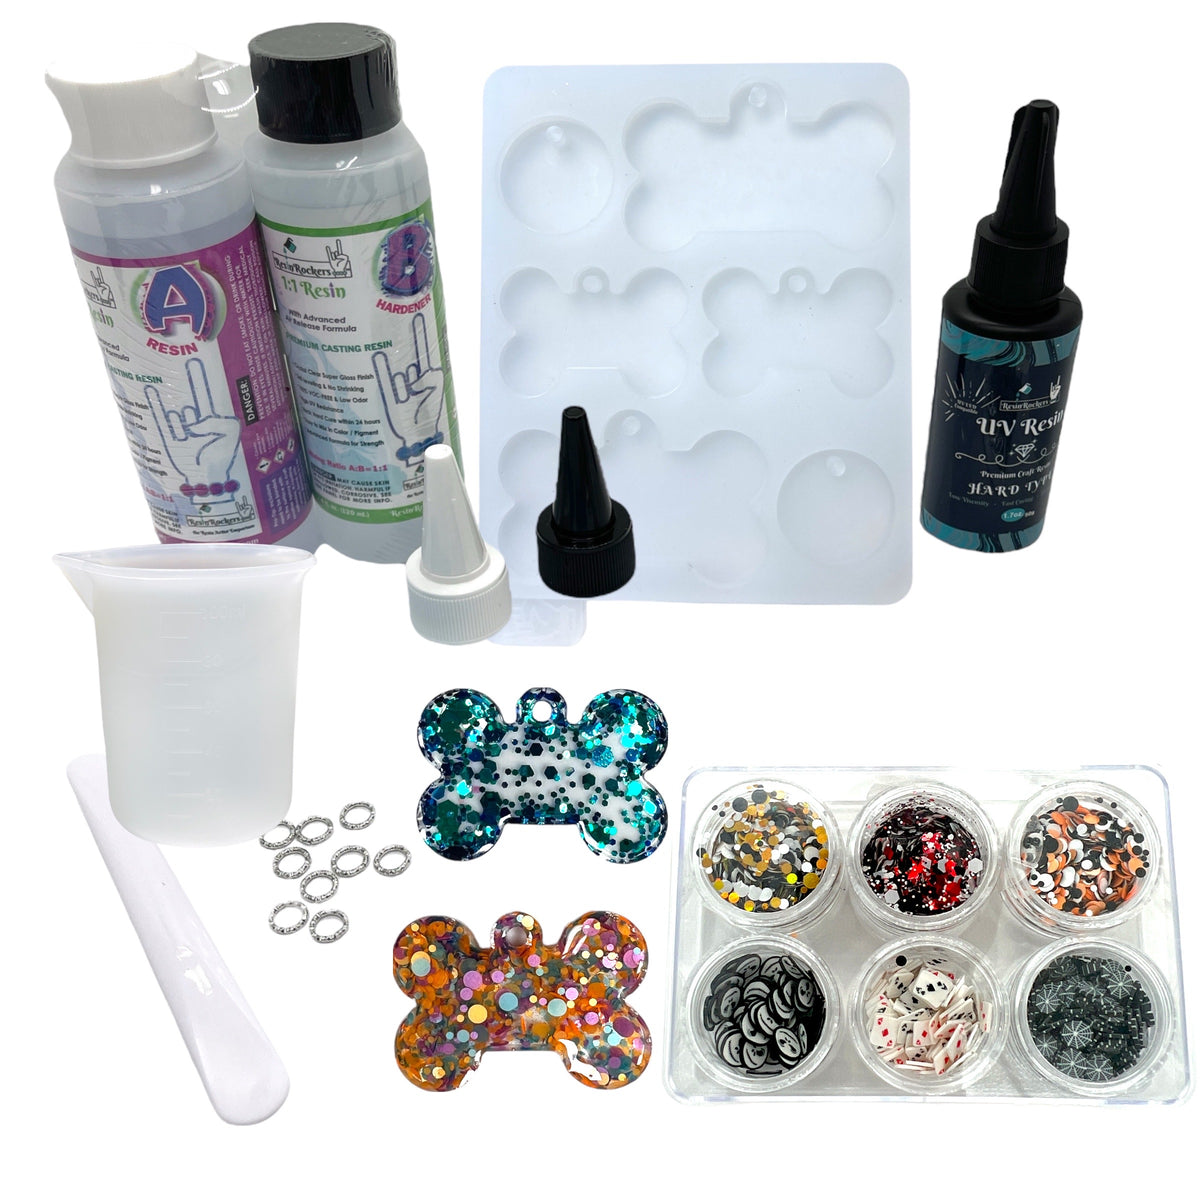 Dog Tag Crafting Kit with Exclusive Resin Rockers UV Safe Mold and More!